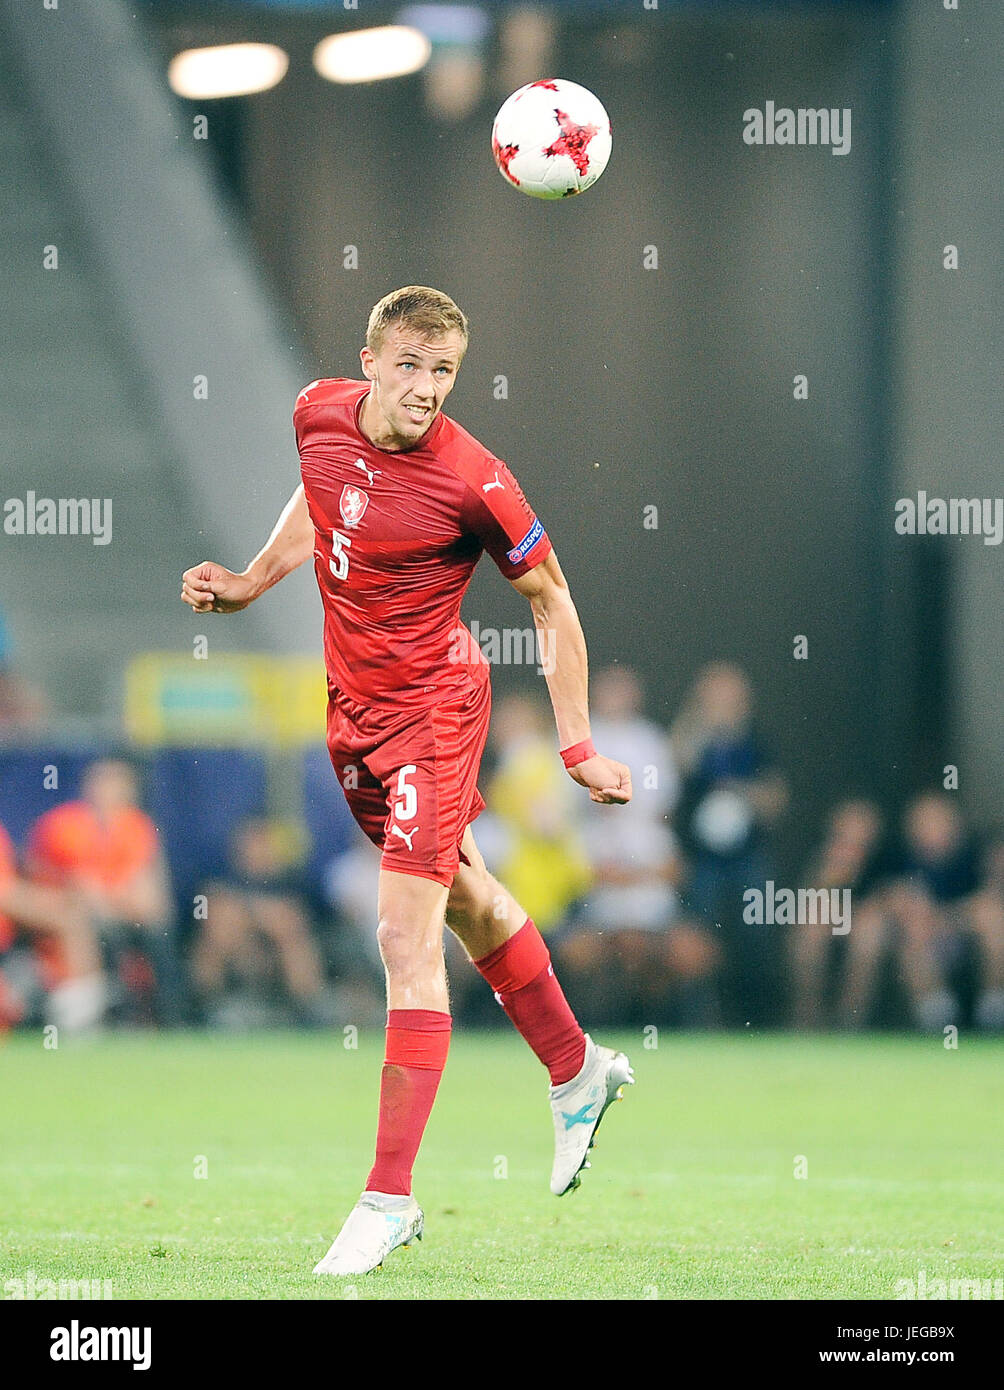 Tomas Soucek during the UEFA European Under-21 match between Czech Republic and Denmark at Arena Tychy on June 24, 2017 in Tychy, Poland. (Photo by MB Media) Stock Photo